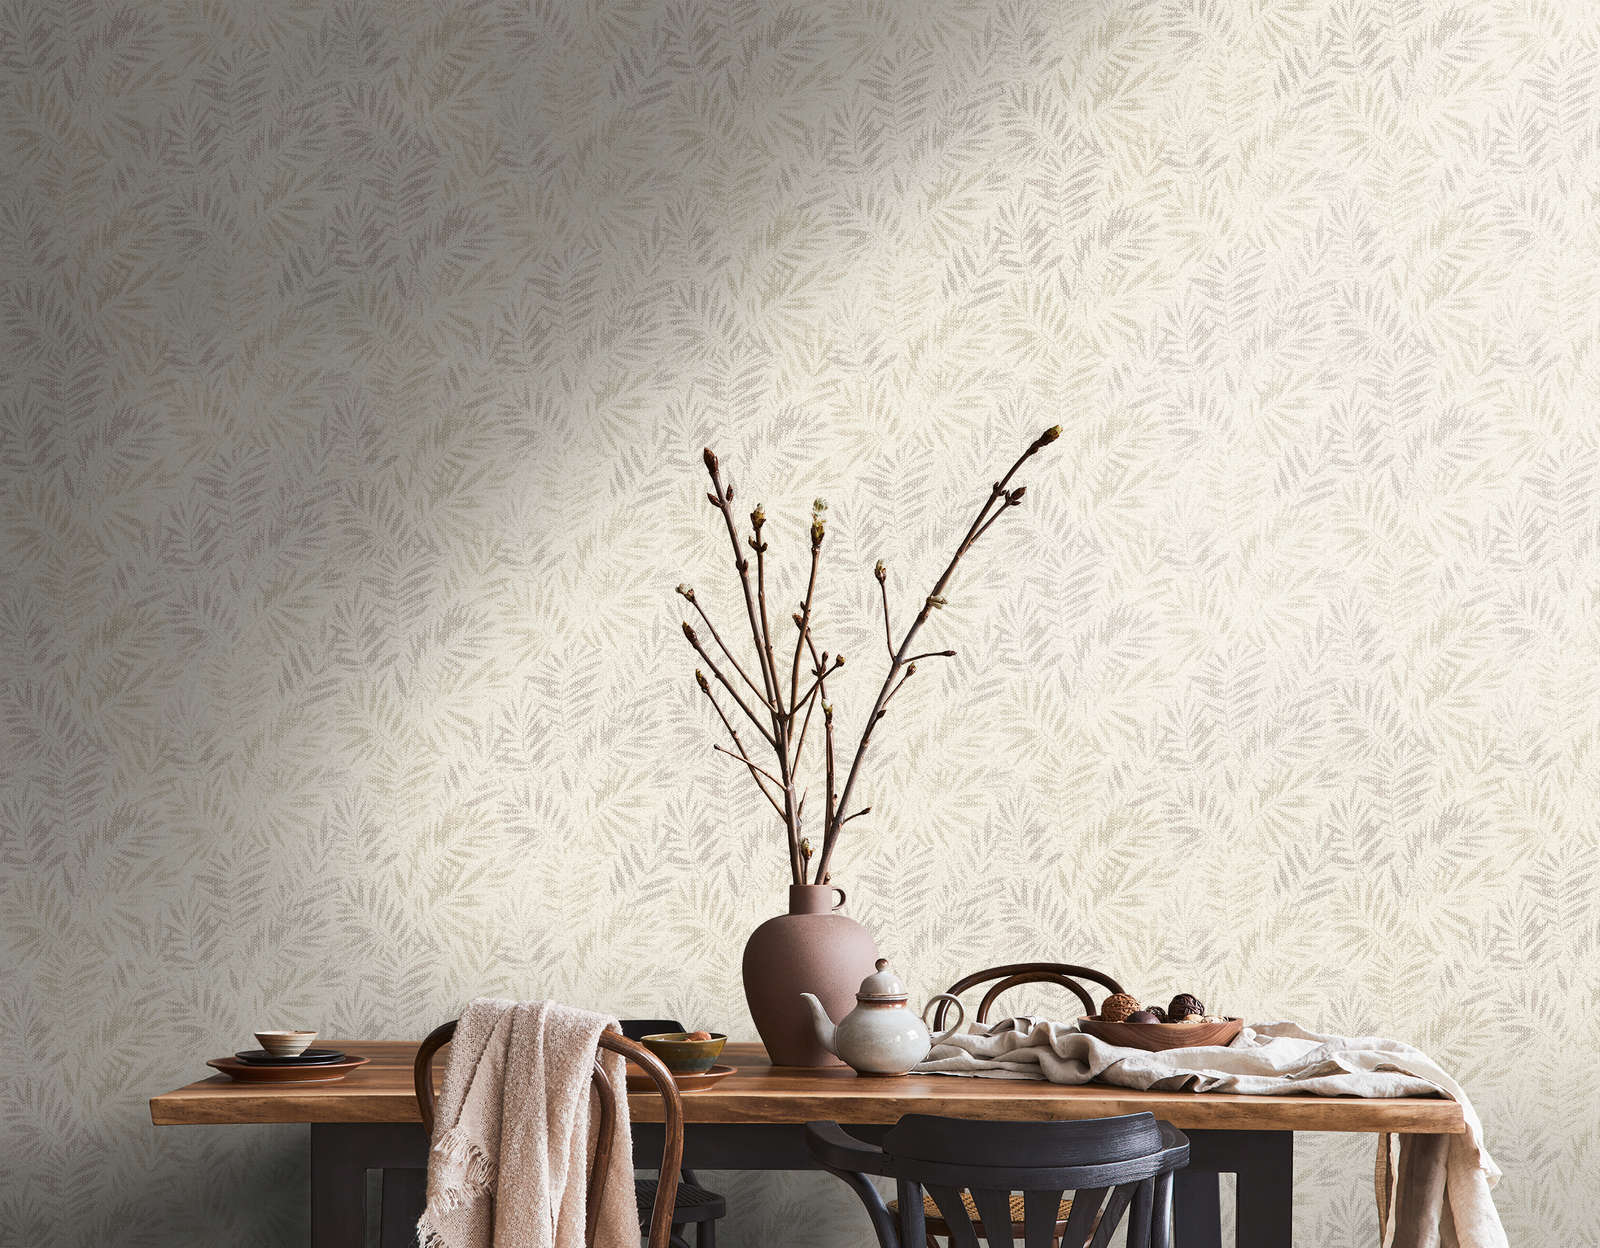             Non-woven wallpaper with glossy leaf pattern - white, grey, silver
        